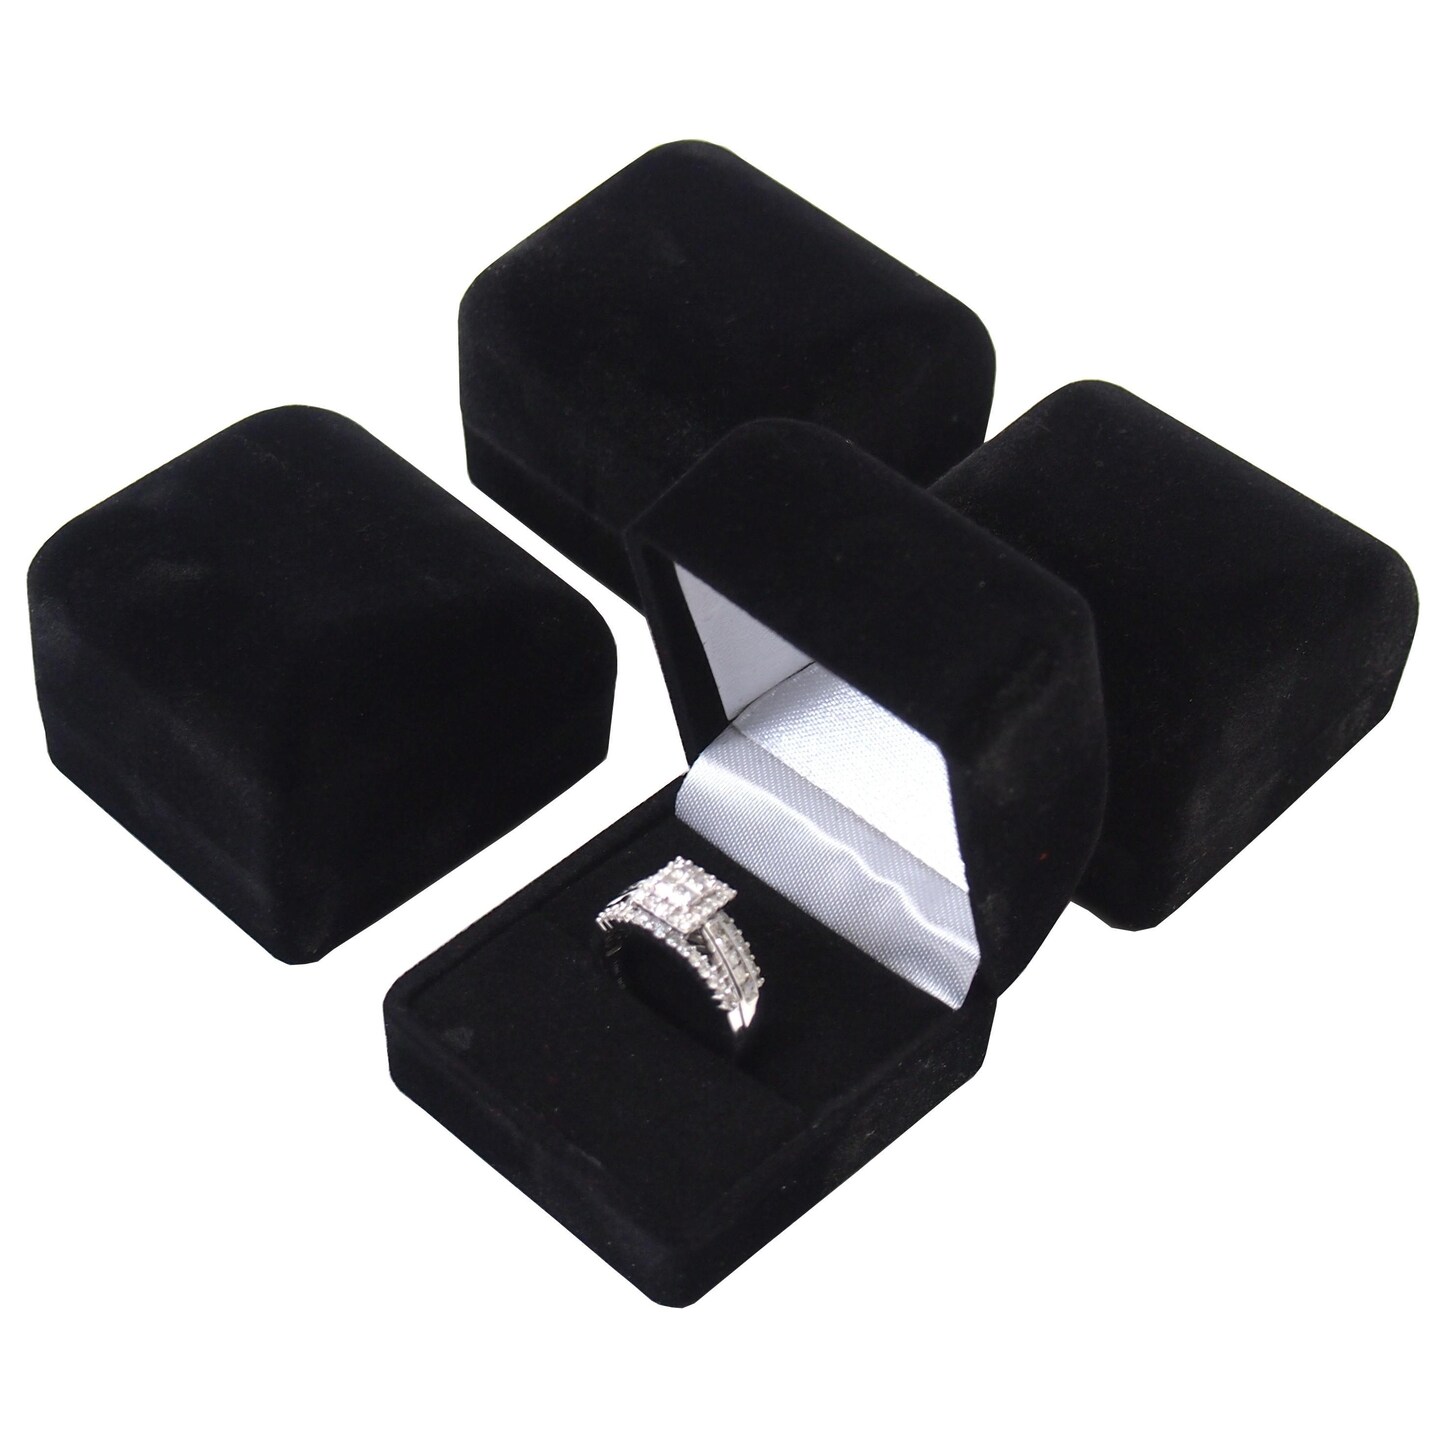 4 Black Flocked Ring Gift Boxes Jewelry Displays | Miscellaneous Props ...